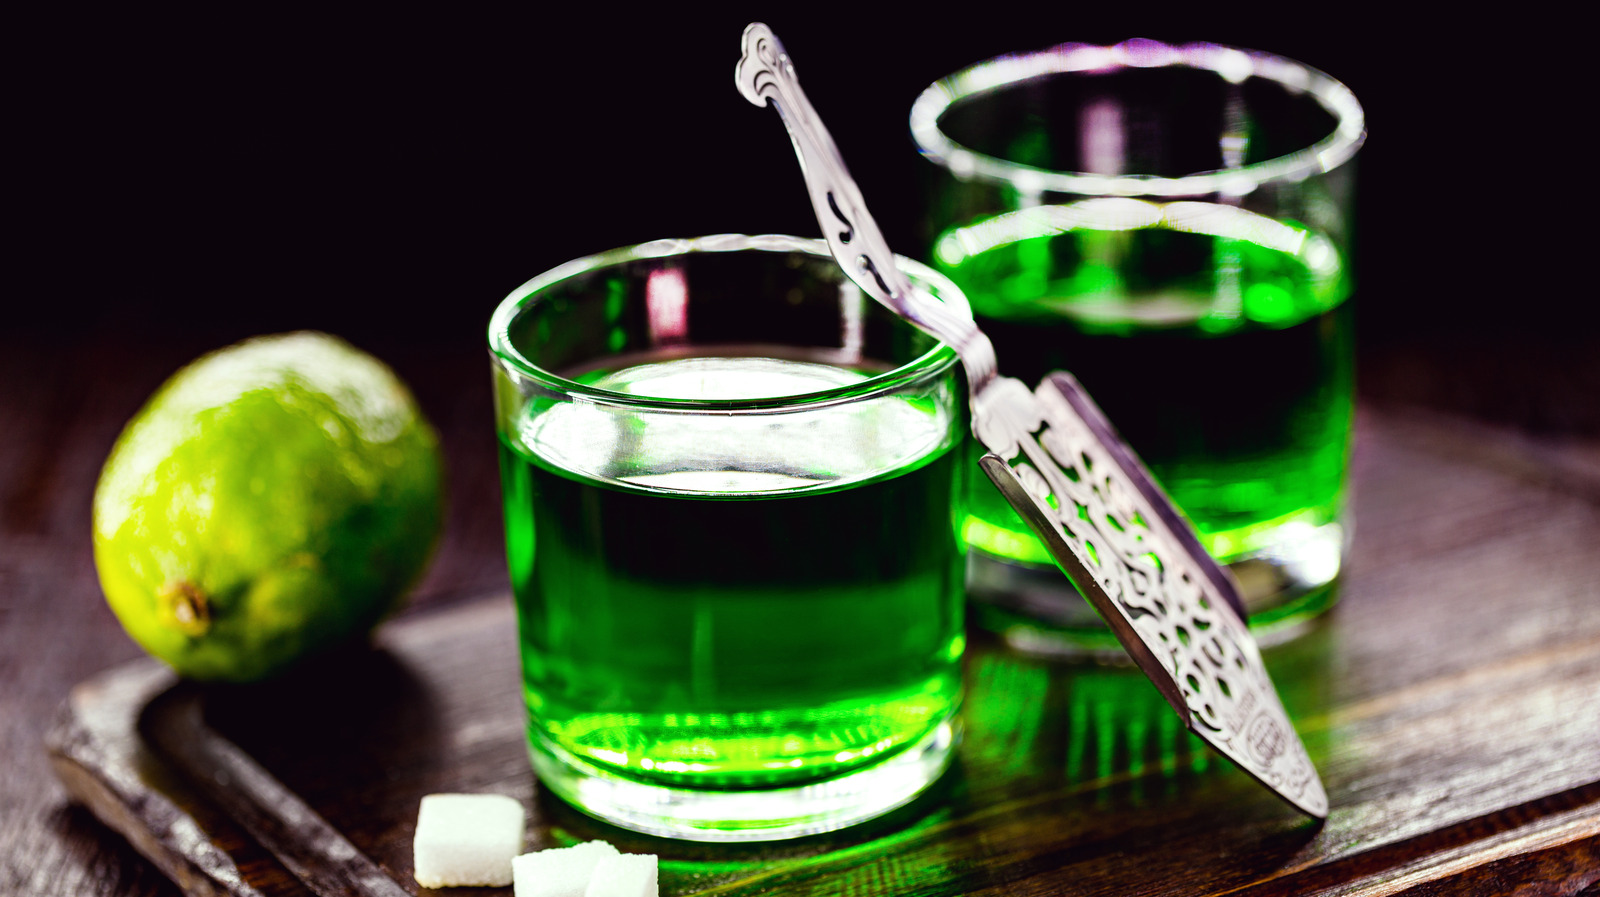 Absinthe: A Physical Reaction & the Famous Green Color